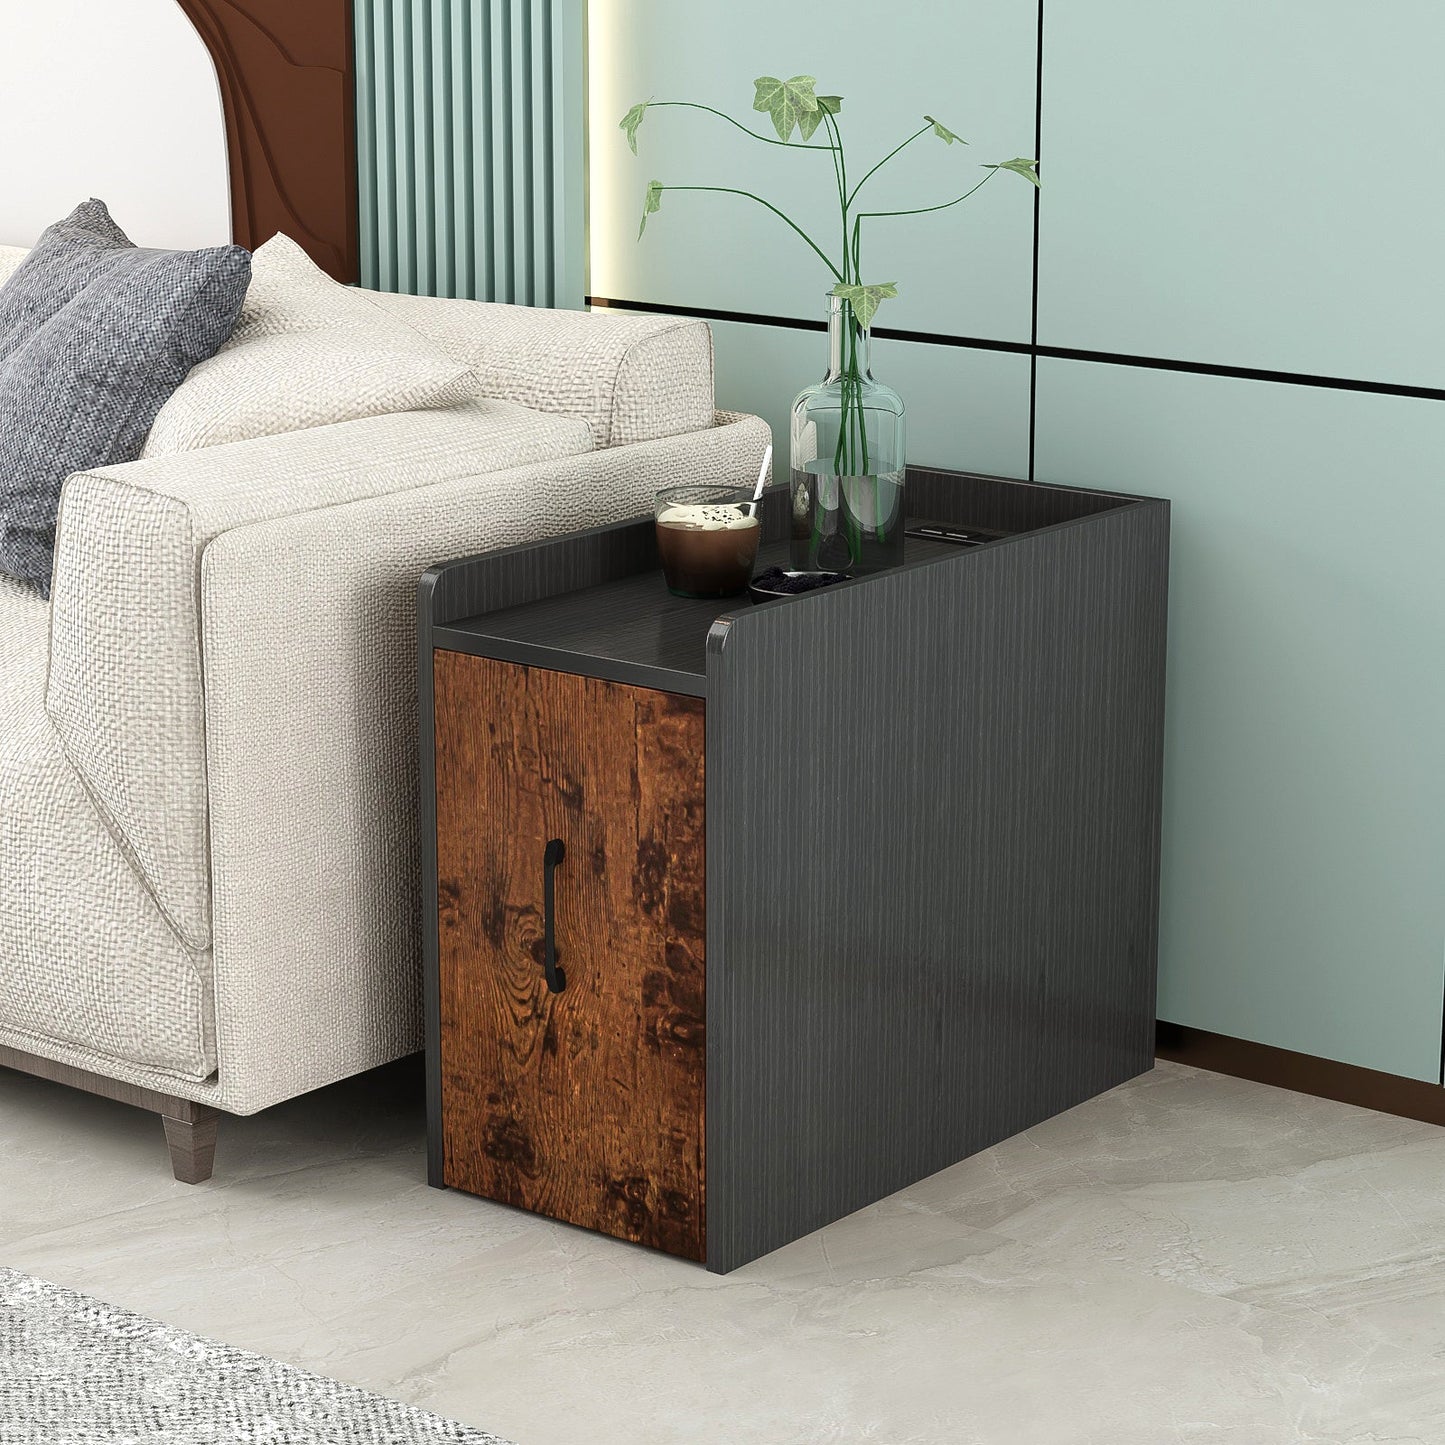 End Table with USB Ports and Power Outlets and 2 Drawers